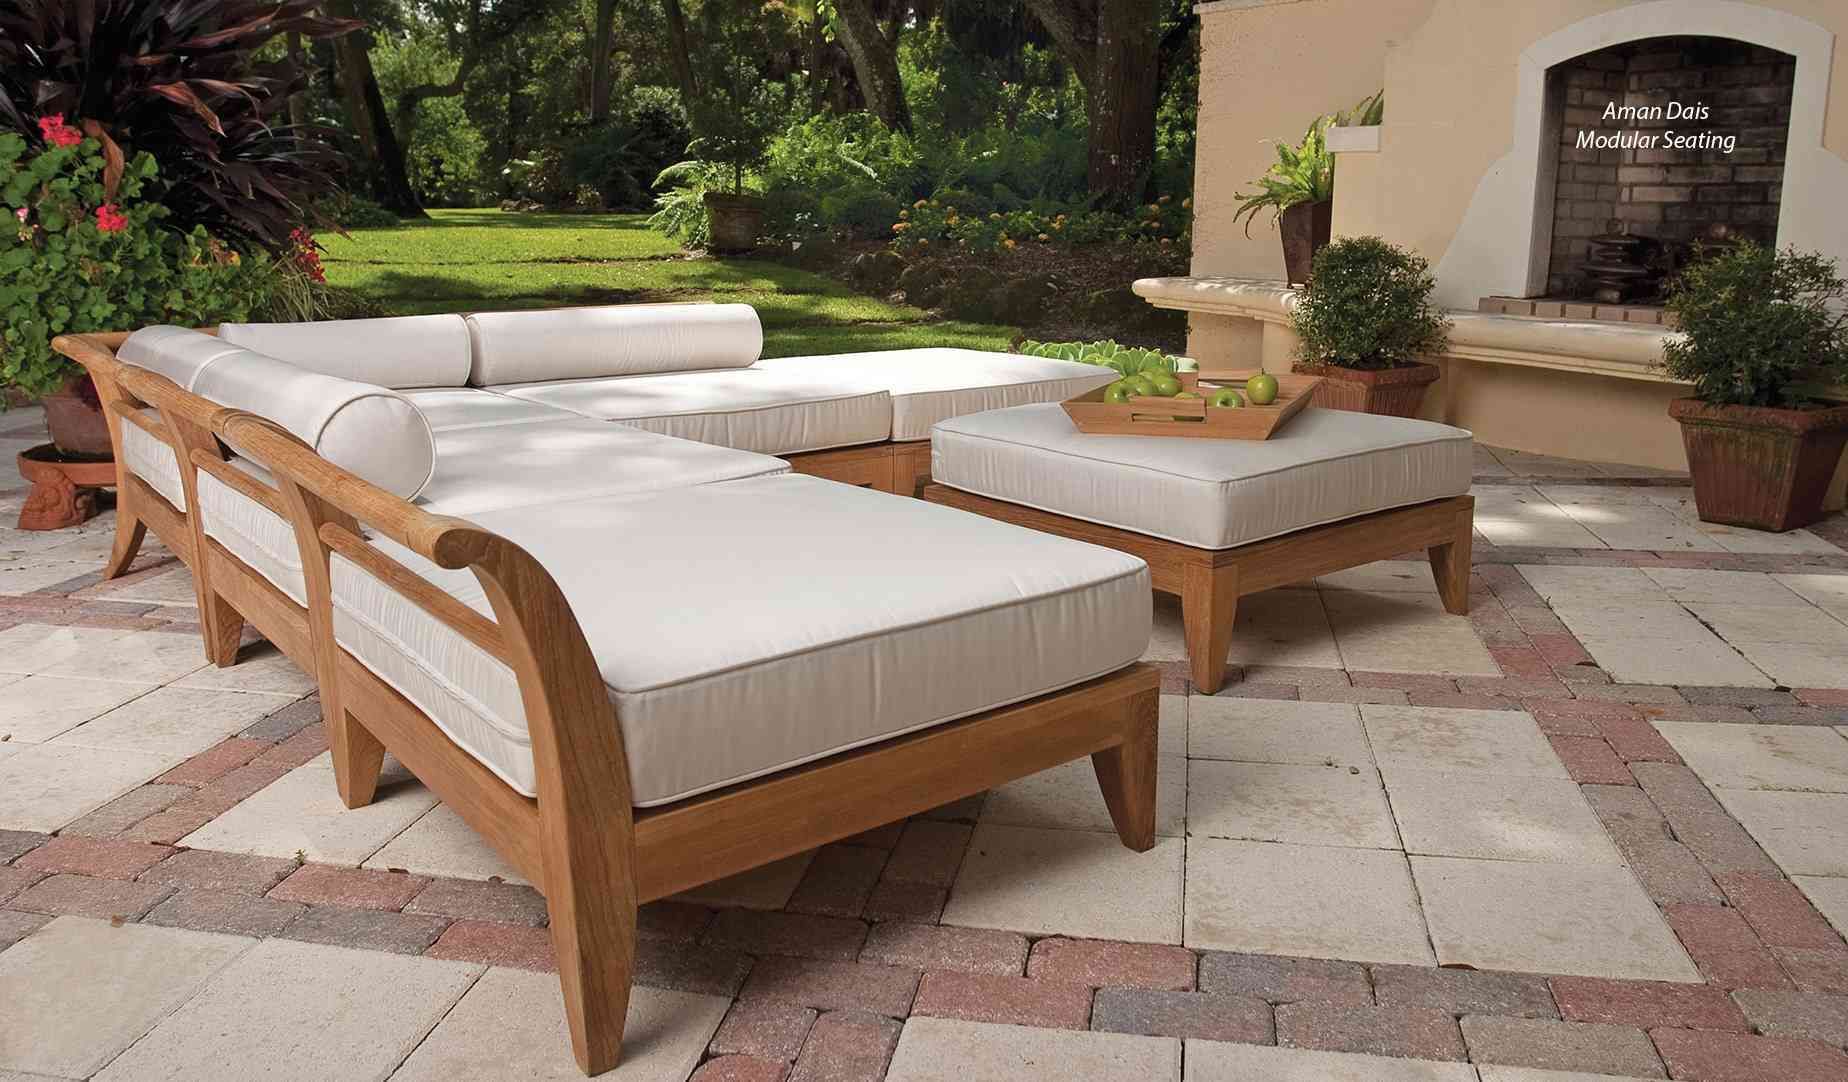 Transform Your Patio With Teak Patio Furniture: Top Picks For Every Style